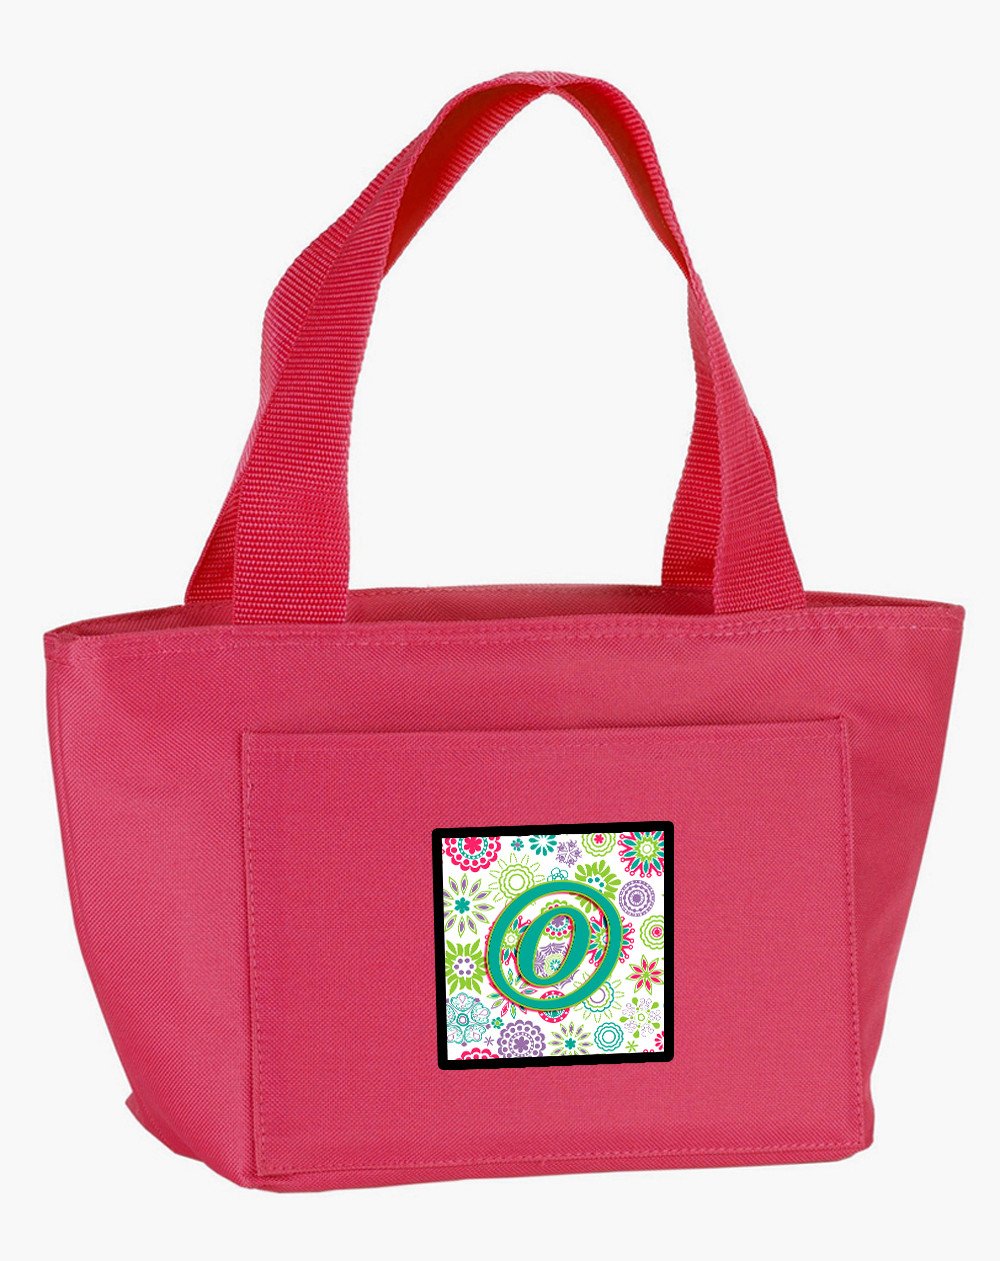 Letter O Flowers Pink Teal Green Initial Lunch Bag CJ2011-OPK-8808 by Caroline's Treasures